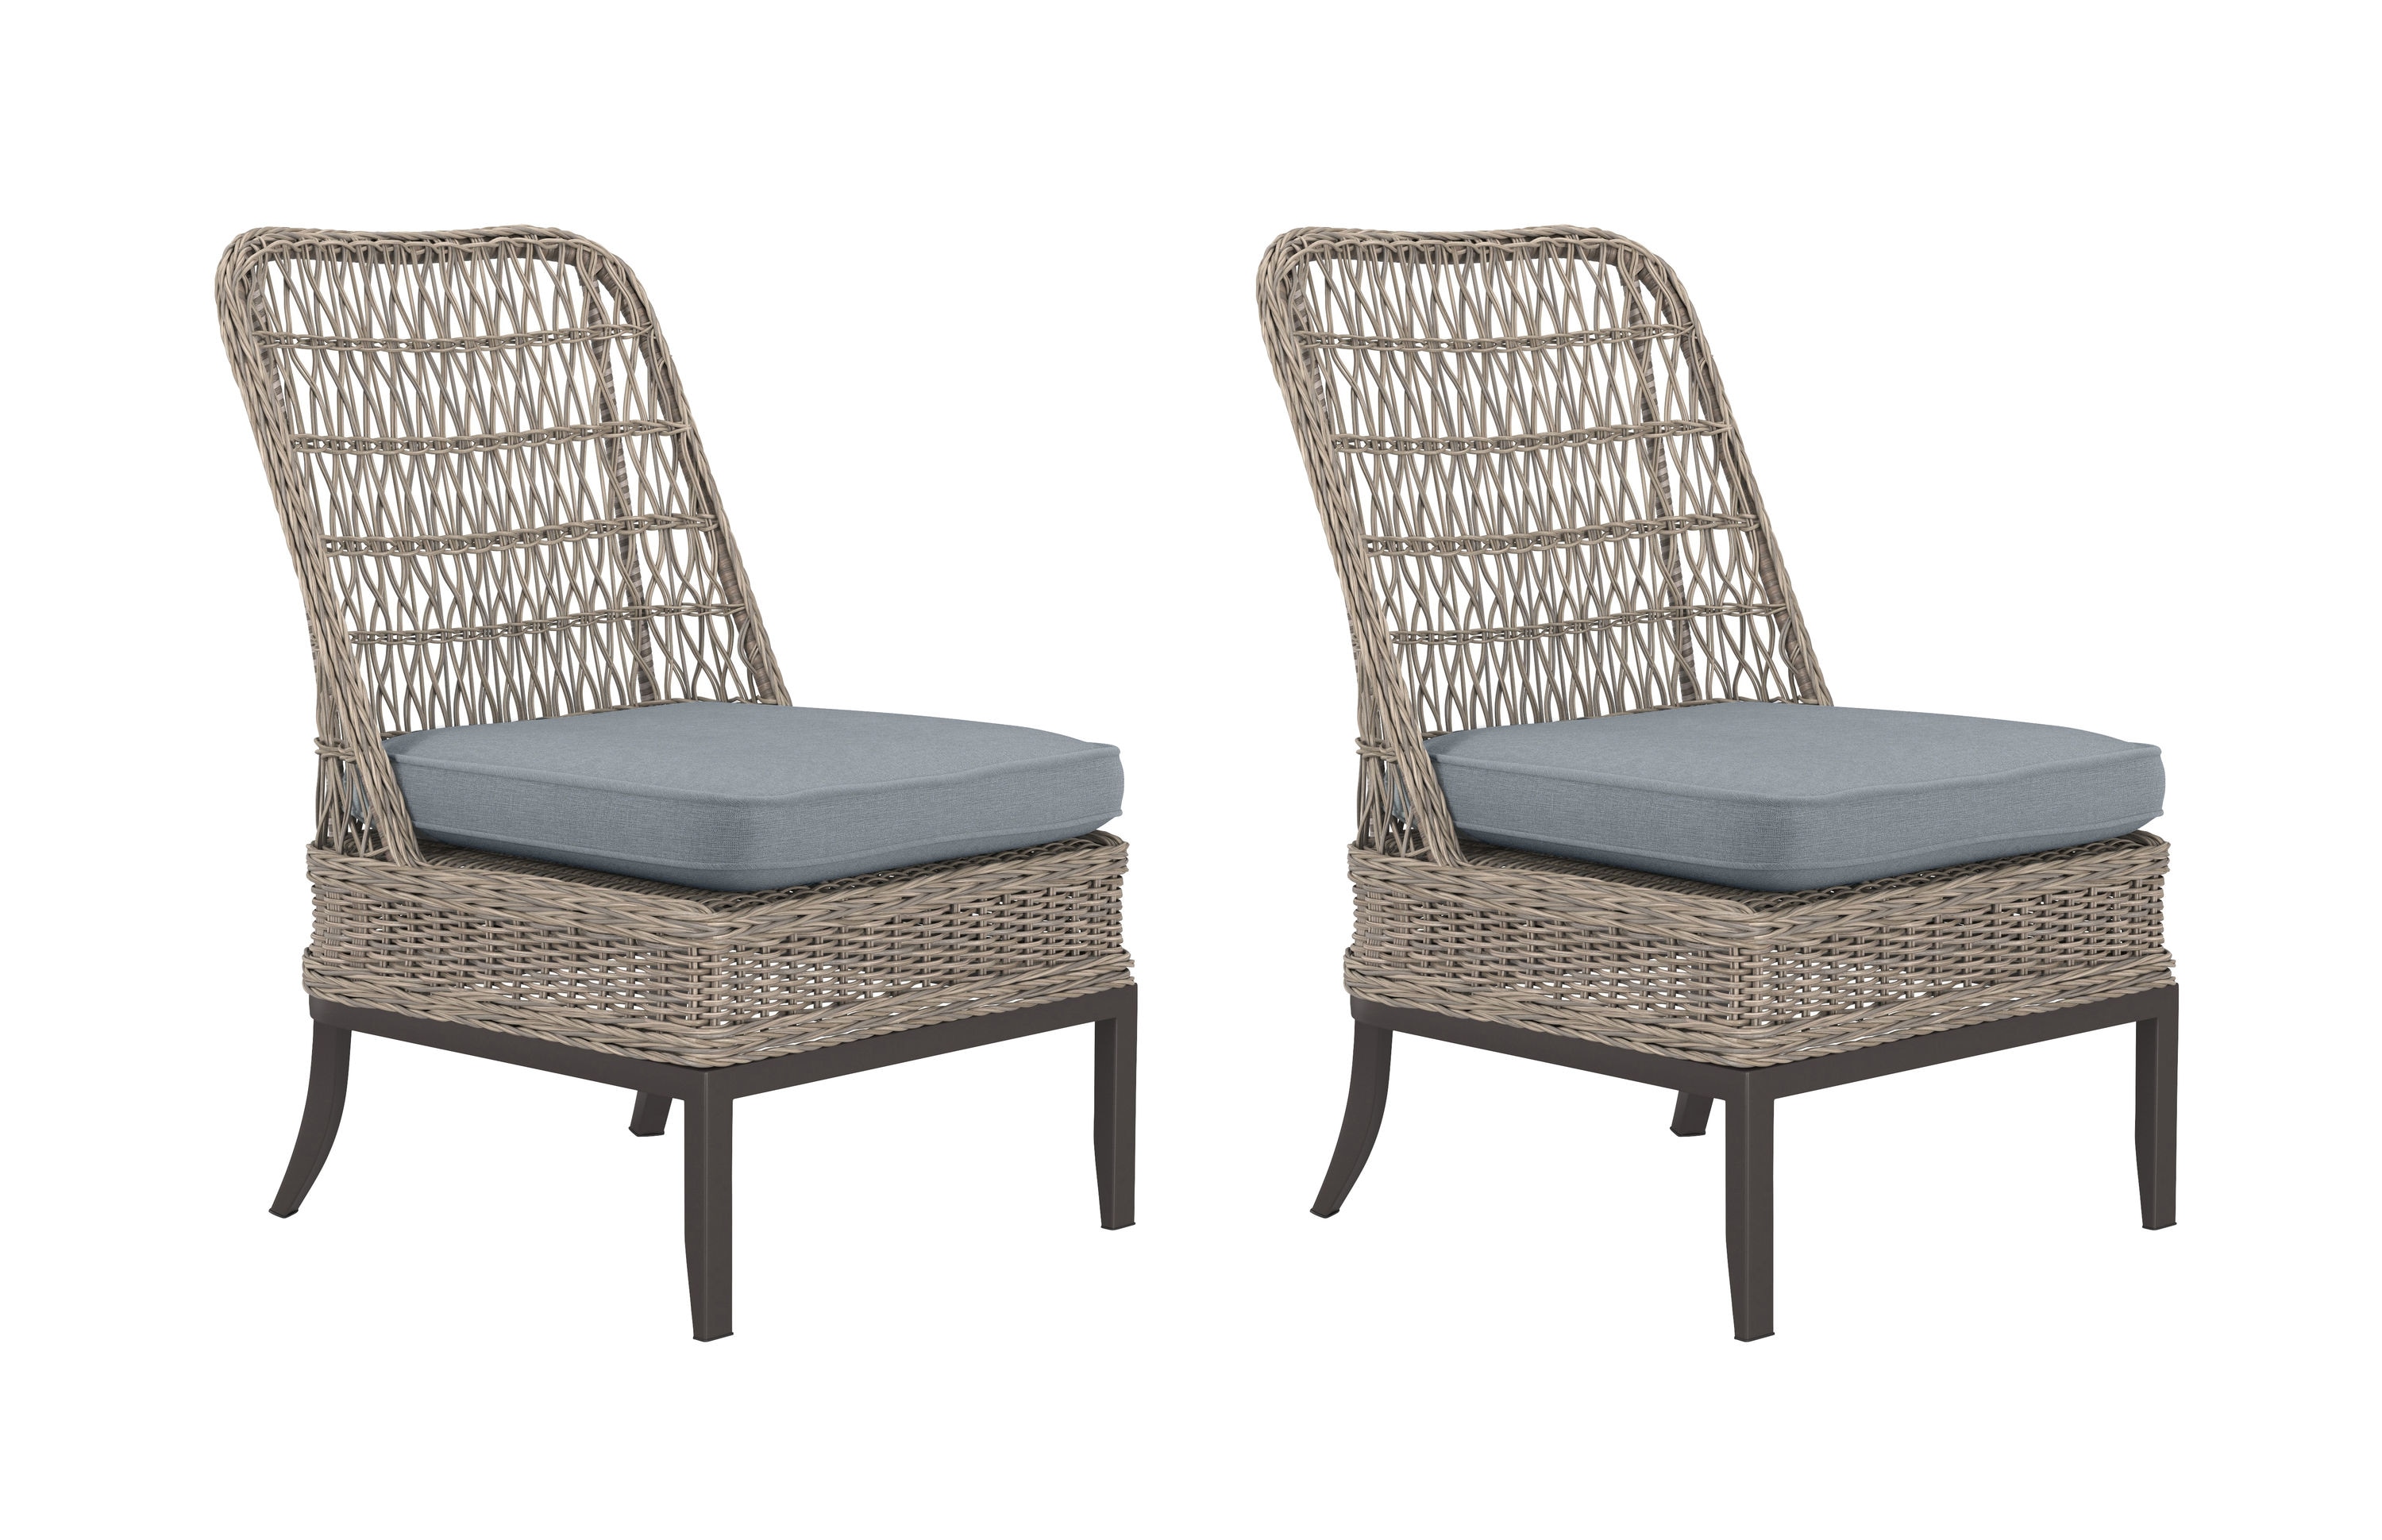 Patio Chairs At Lowes Com